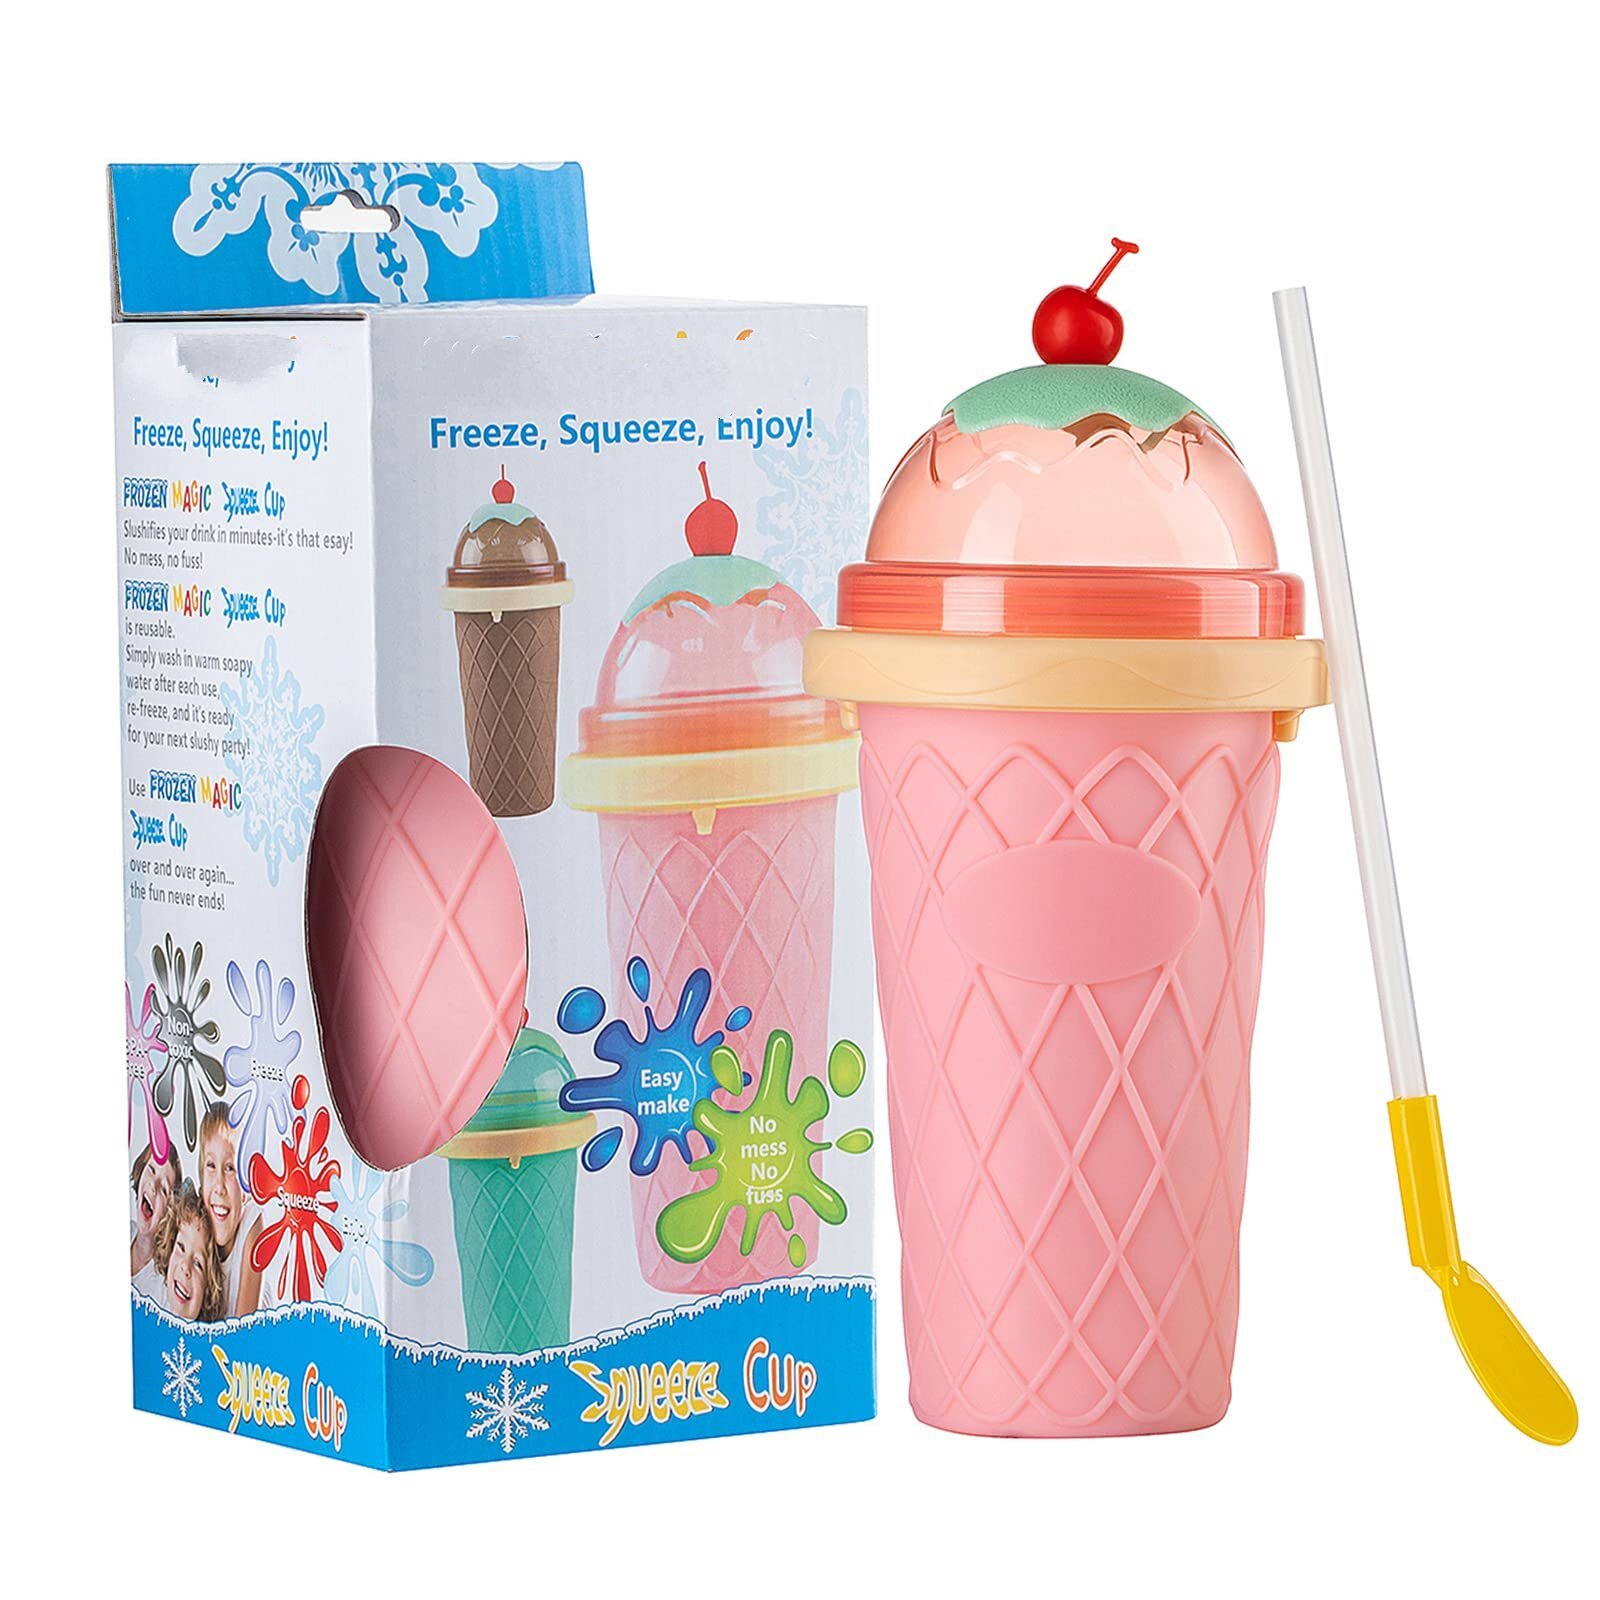 Fast Cooling Cup Homemade Milk Shake Ice Cream Maker For Children And Family Dequate Cooling Cup Diy Smoothie Ice Cream Quick Frozen Cup Magic Slushy Maker Squeeze Cup 